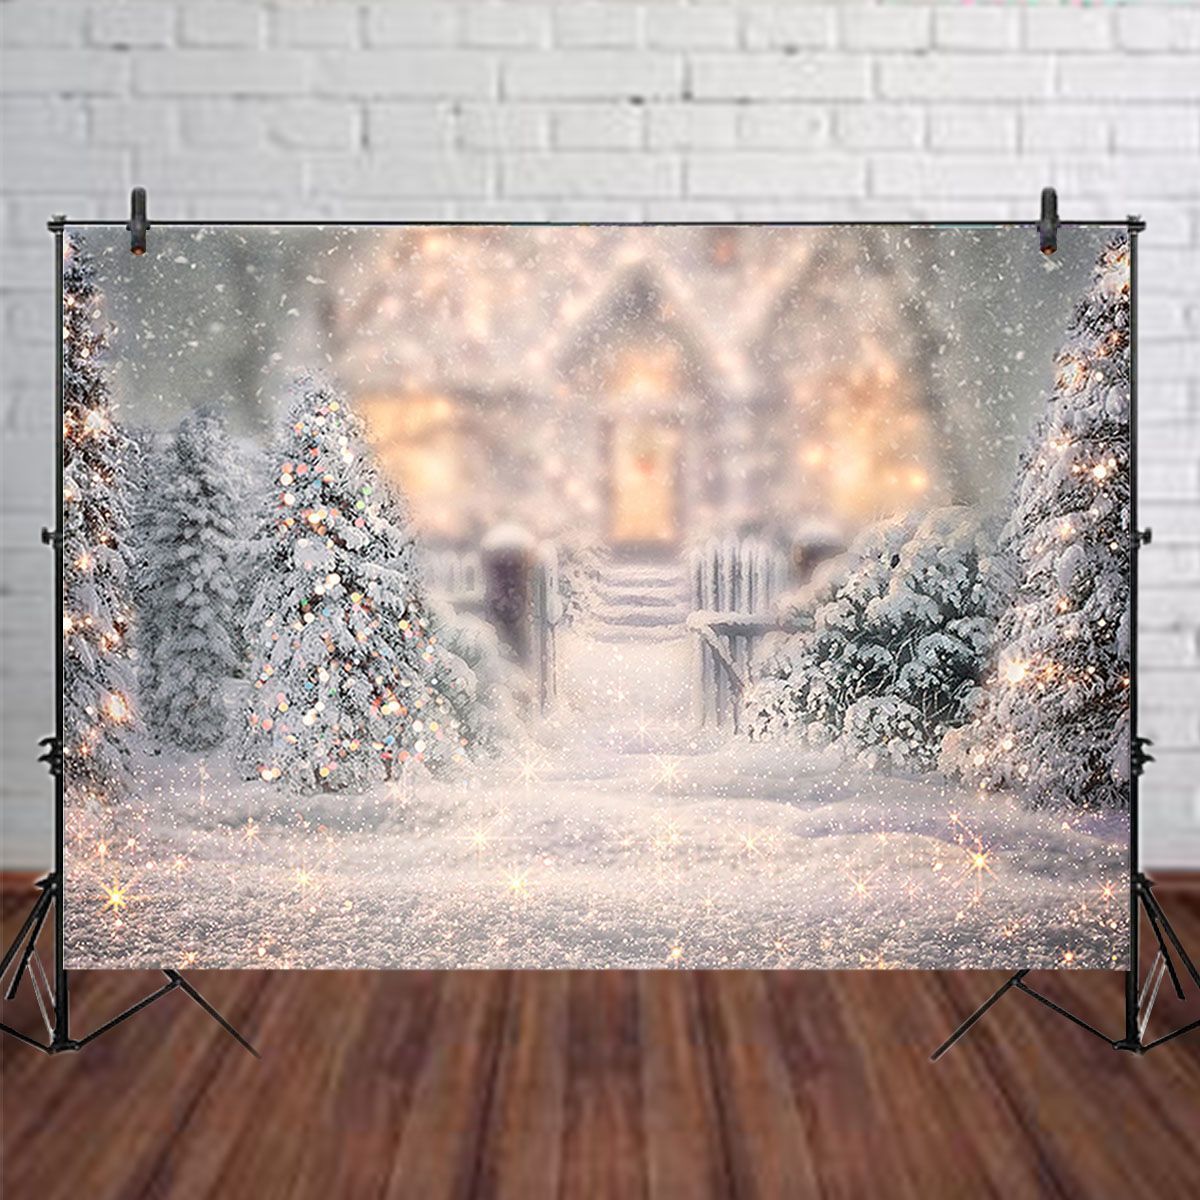 5x3FT-7x5FT-8x6FT-Christmas-Tree-Snow-Photography-Backdrop-Background-Studio-Prop-1609479